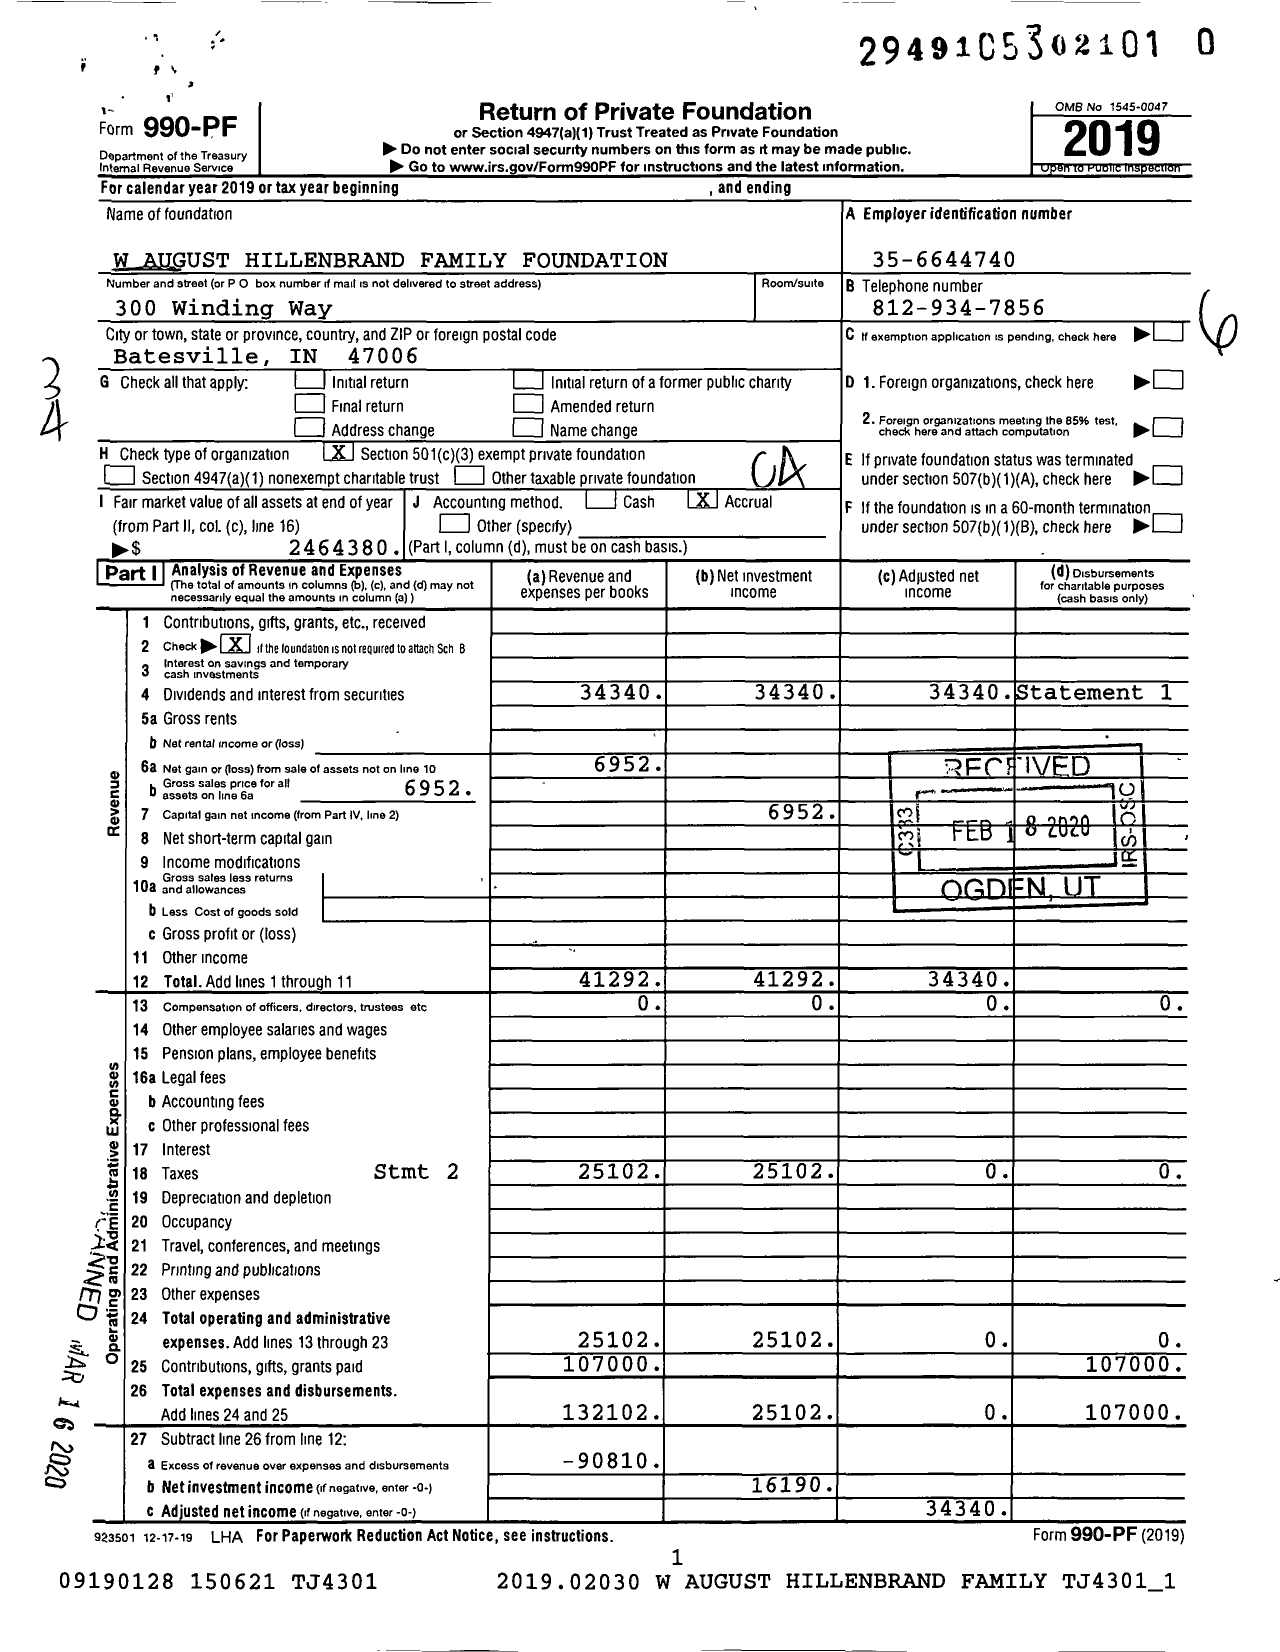 Image of first page of 2019 Form 990PR for W August Hillenbrand Family Foundation